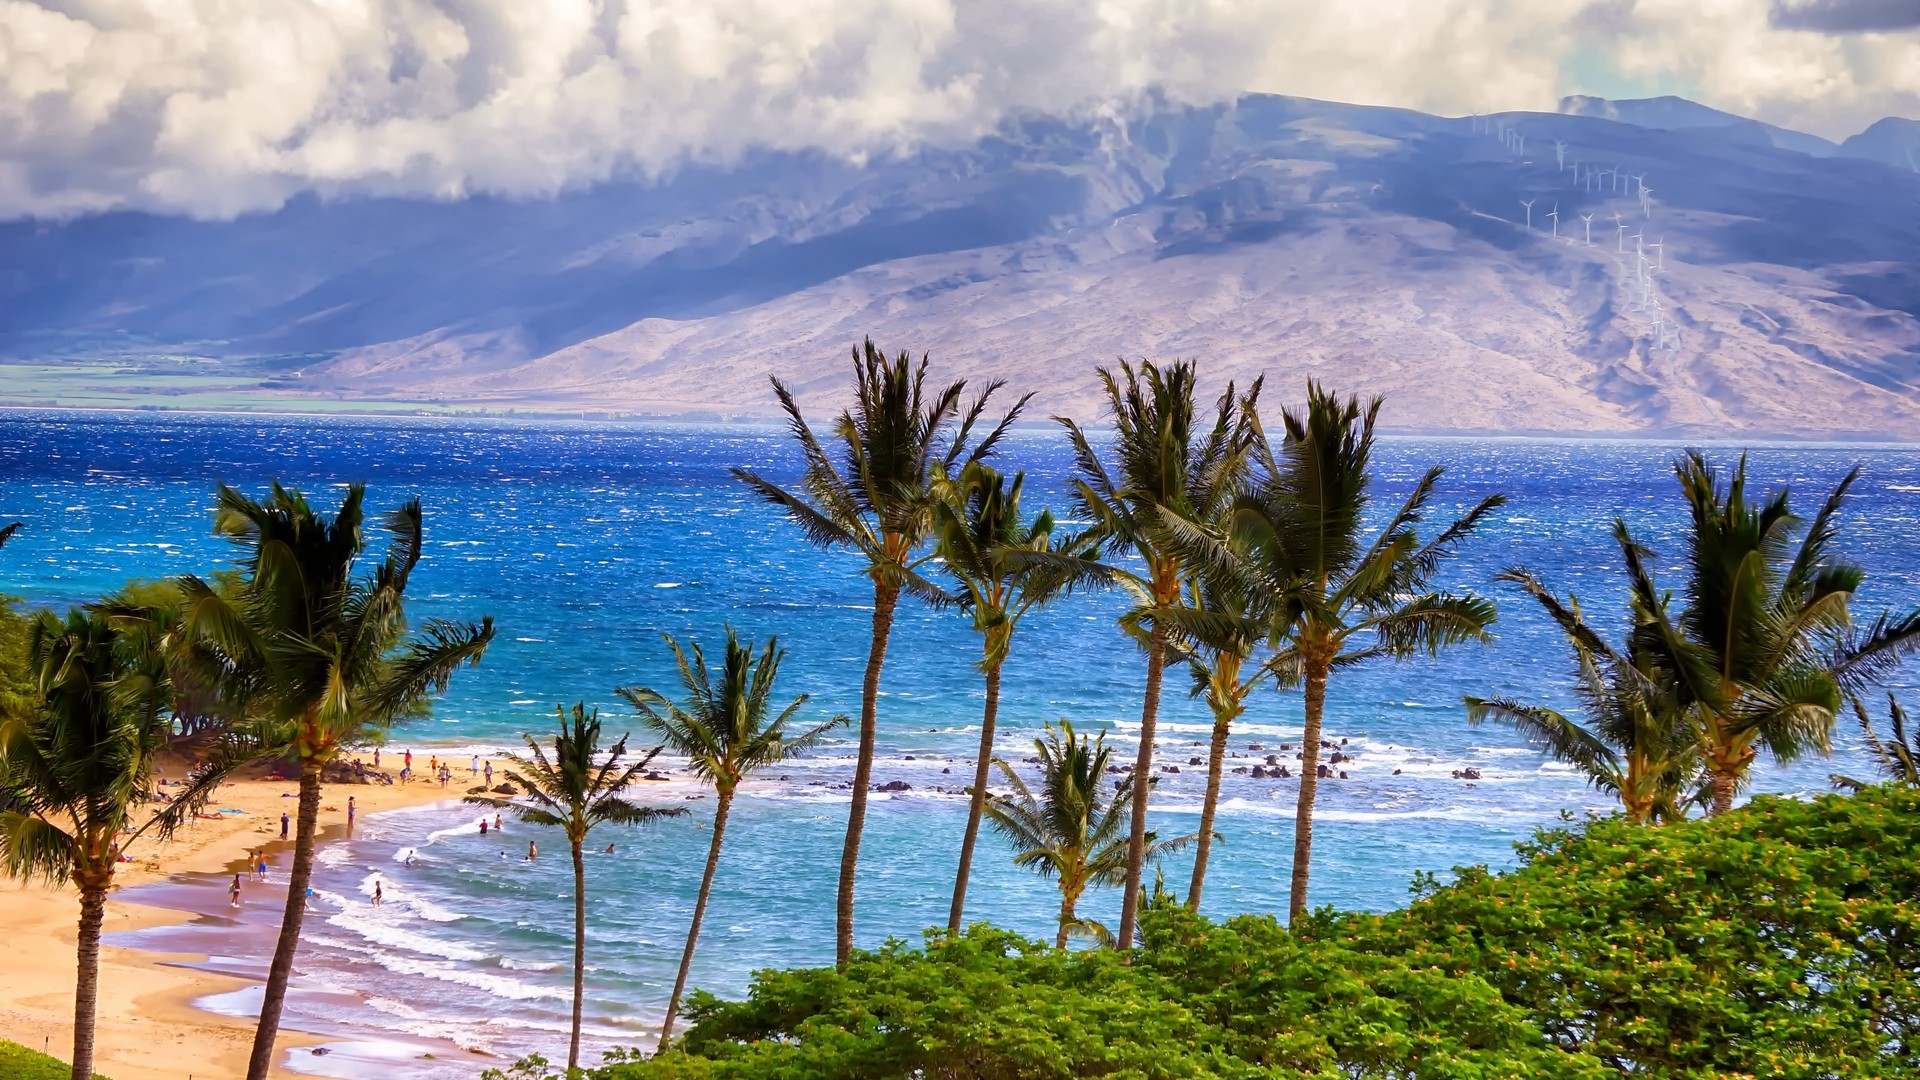 1920x1080 wallpapers: sea, mountains, palm trees, beach (image)